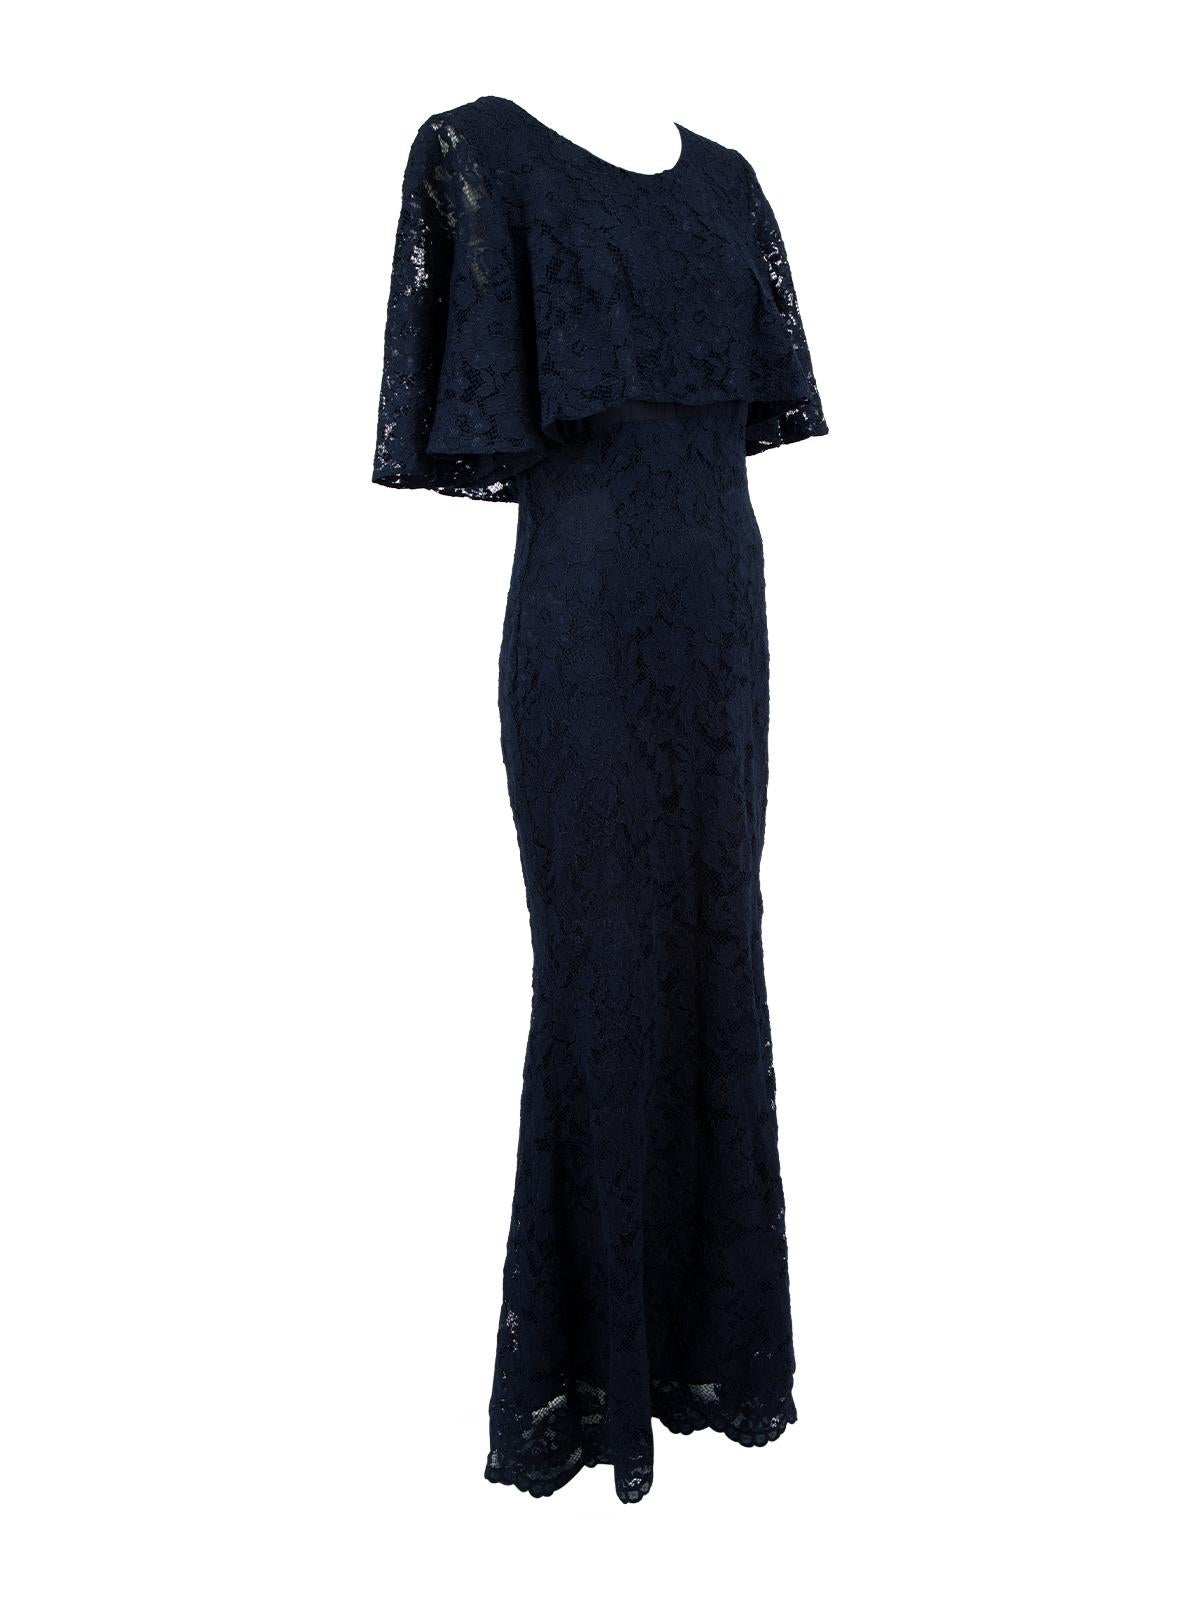 CONDITION is Very good. Hardly any visible wear to dress is evident on this used Badgley Mishka designer resale item. Details Navy blue Lace Maxi dress Round neckline Floral lace detail Layered top Short flutter sleeves Back zip fastening with hook